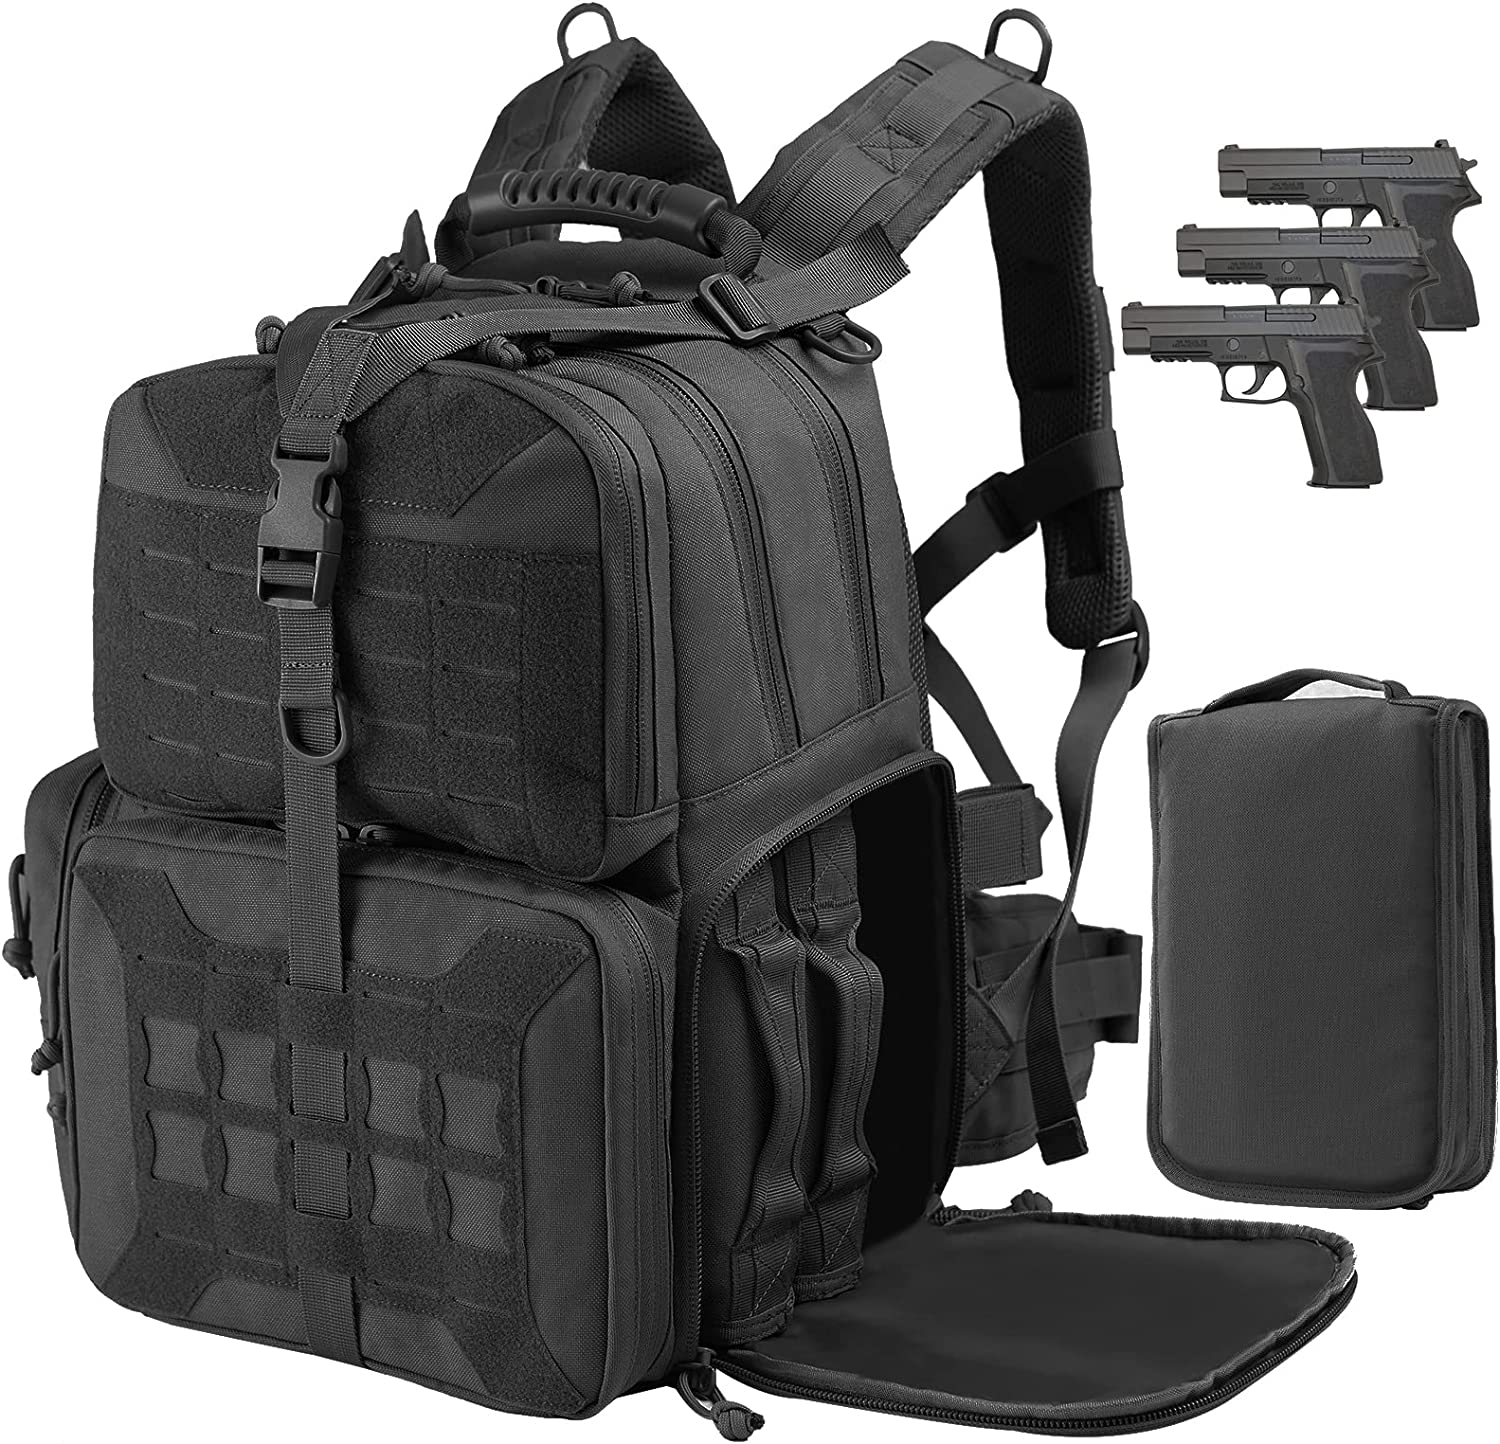 Tactical Range Backpack Bag, VOTAGOO Range Activity Bag For Handguns And Ammo, 3 Pistol Carrying Case For Hunting Shooting